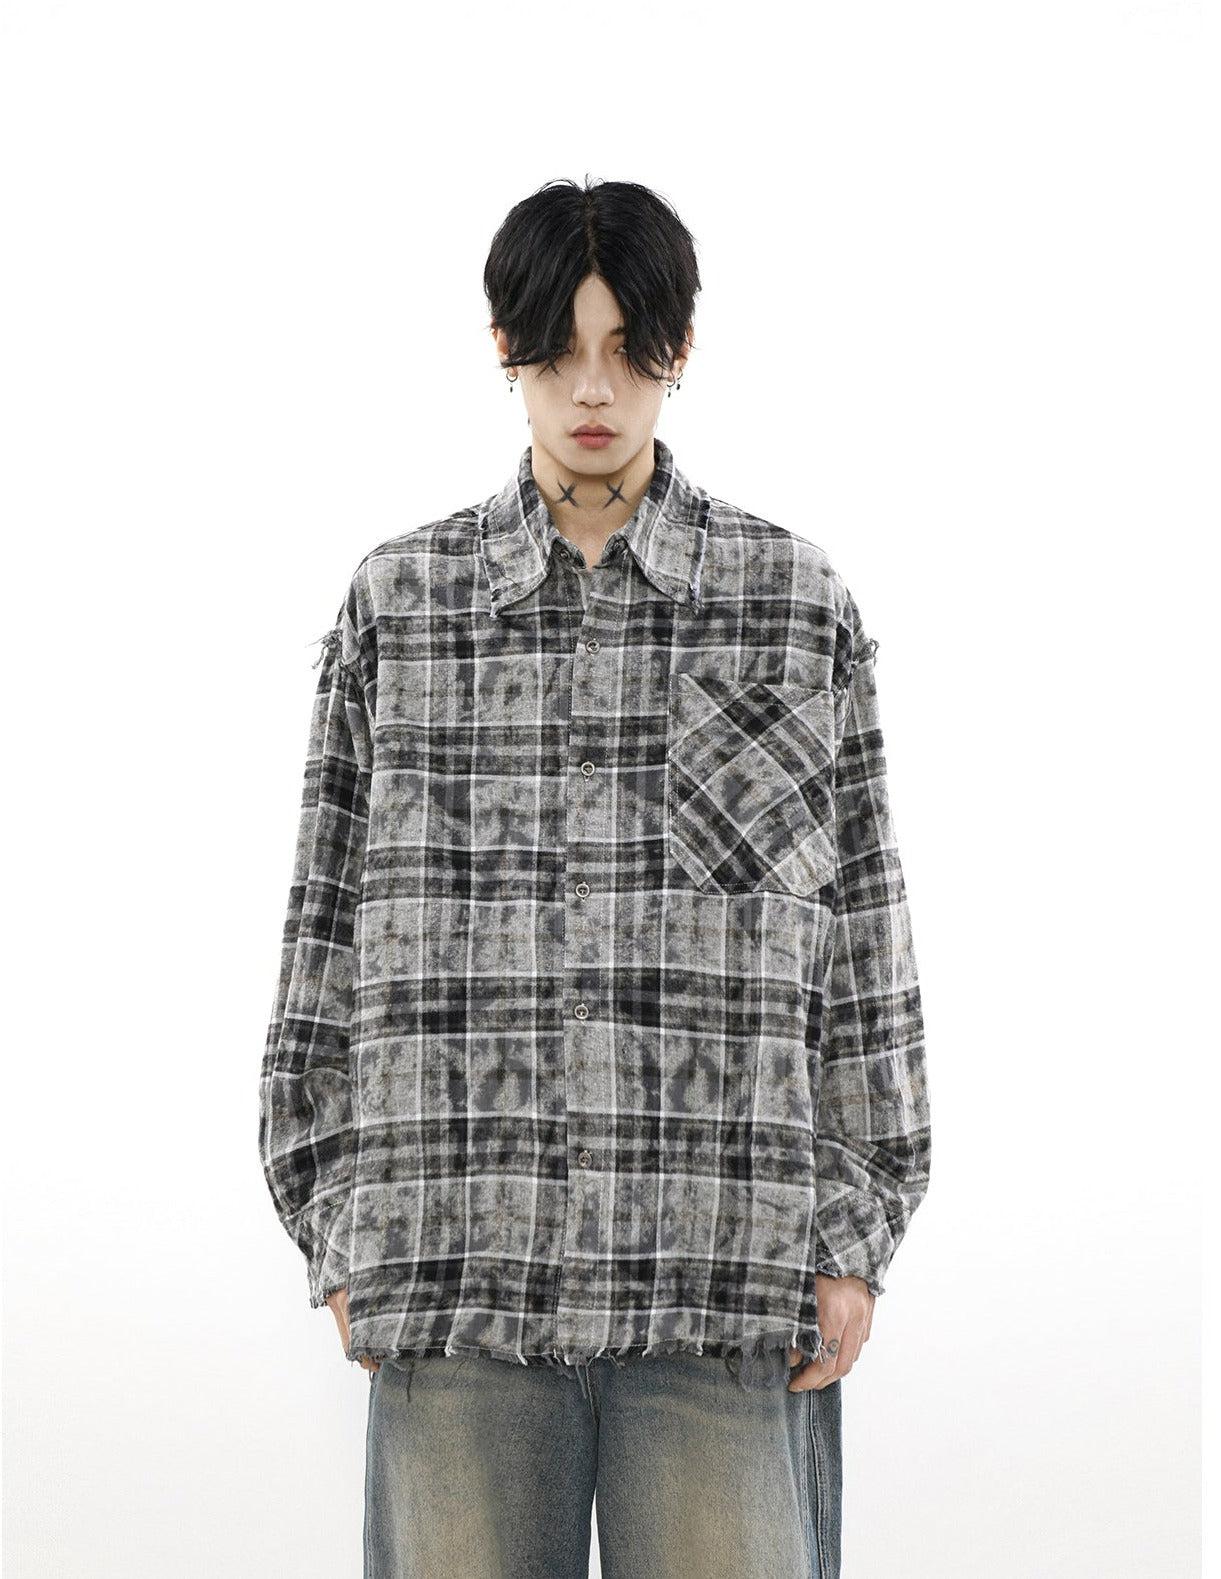 Mr Nearly Brushed Plaid Long Sleeve Shirt Korean Street Fashion Shirt By Mr Nearly Shop Online at OH Vault